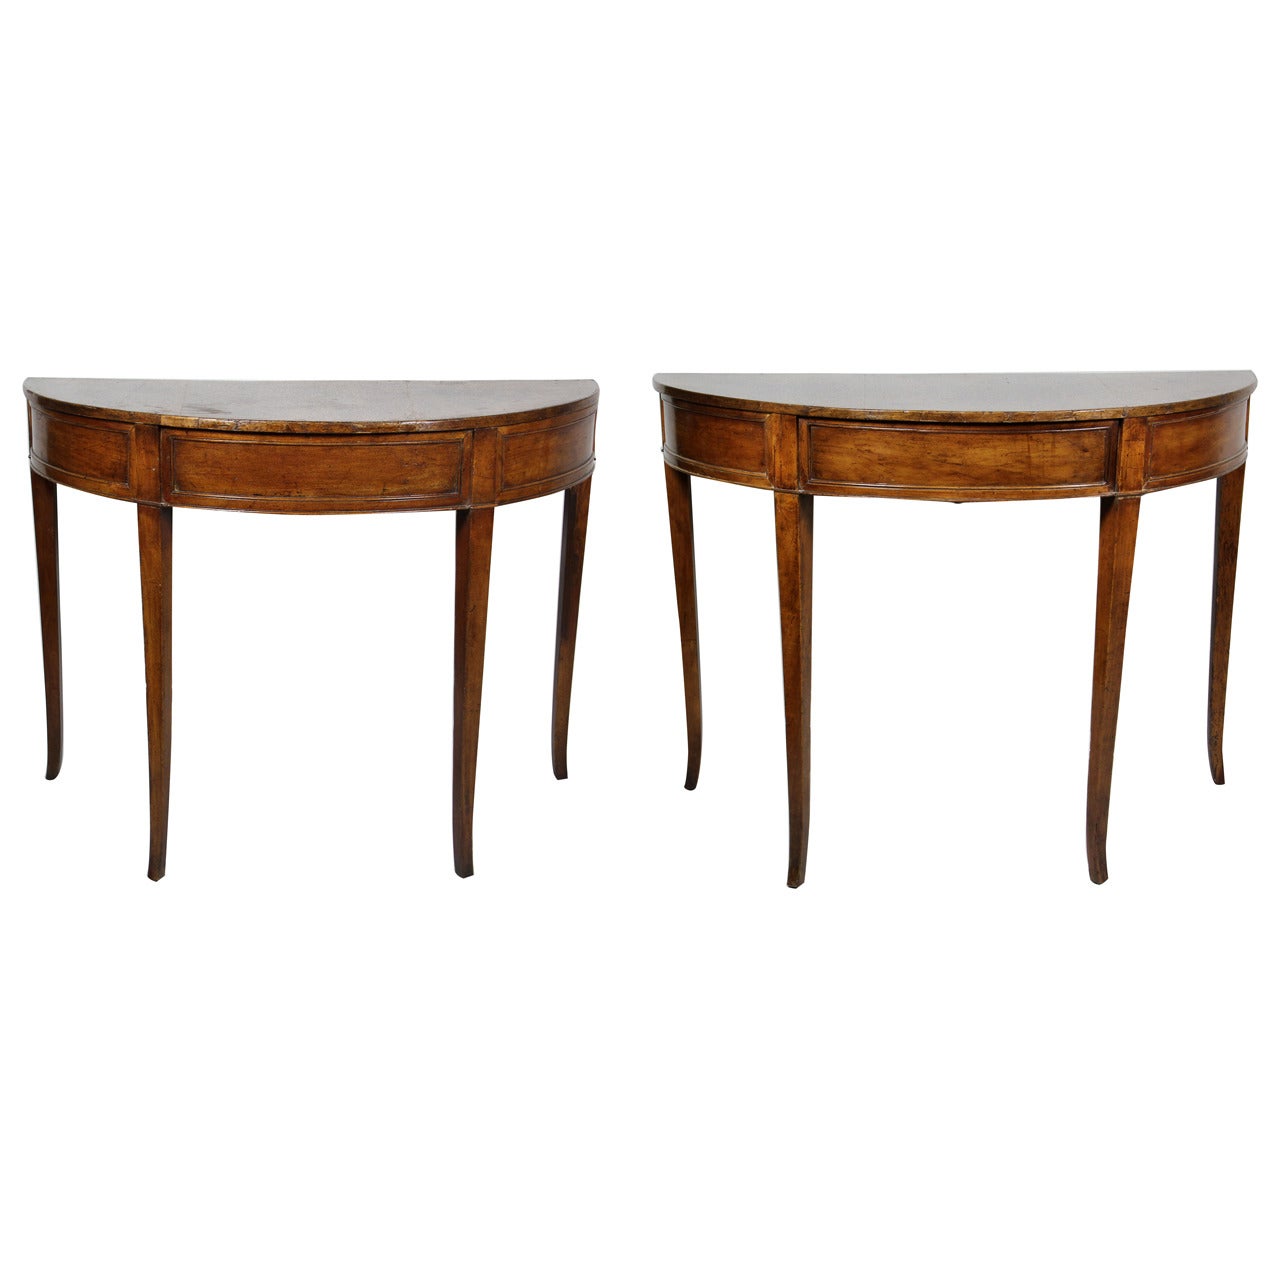 Pair of Italian Neoclassical Walnut Demilune Console Tables